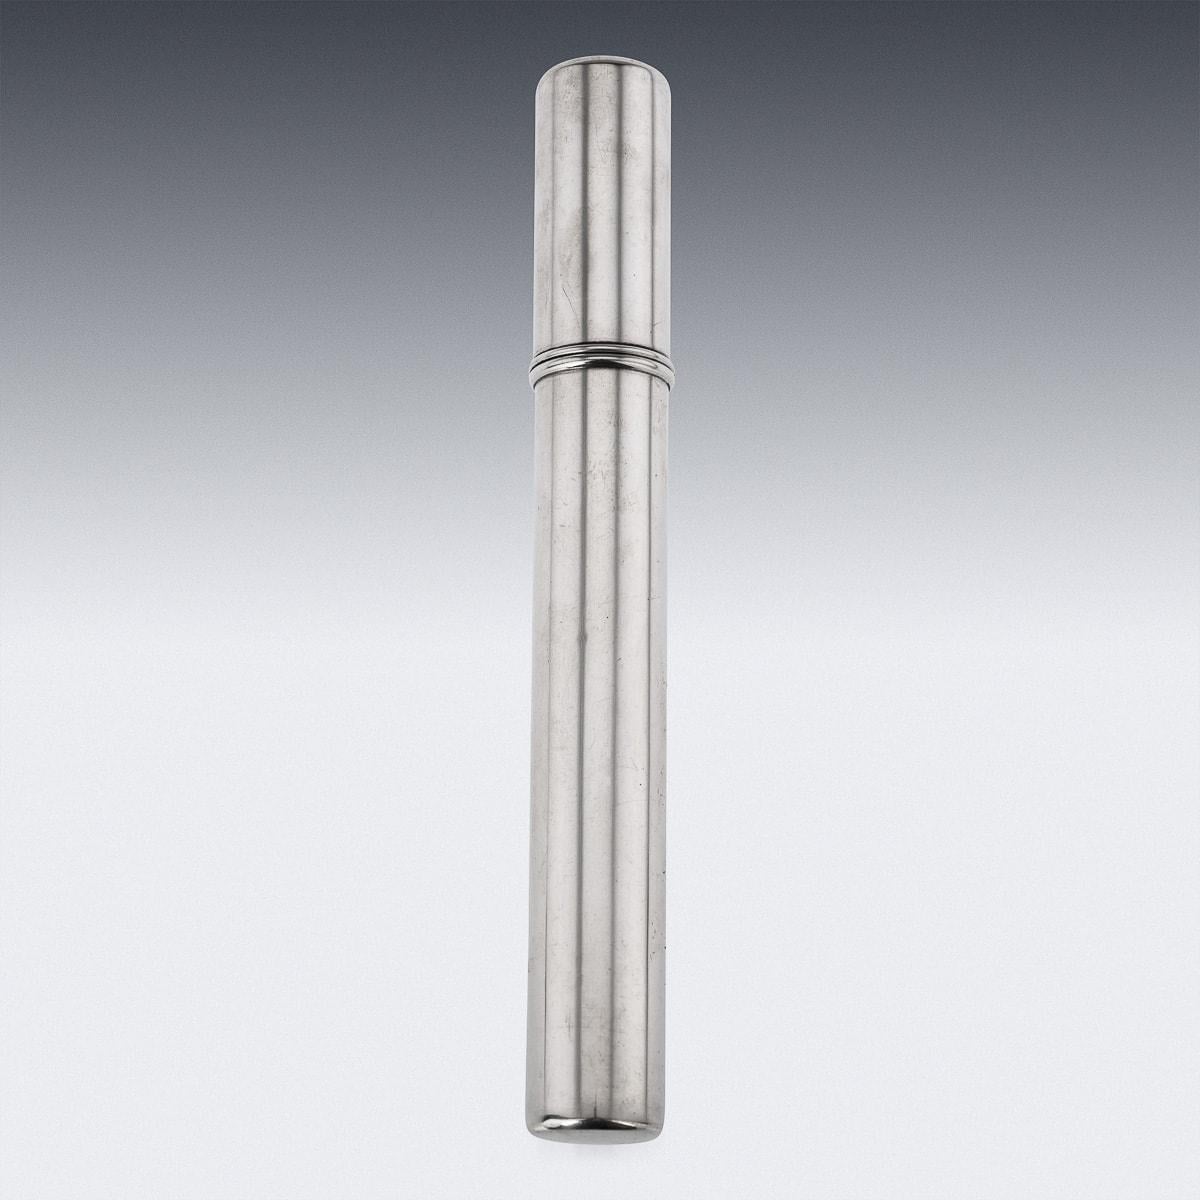 Antique 20th Century Victorian solid silver long cigar tube with removable lid. The case is of a rounded form enabling one long cigar to be stored safely. Hallmarked English silver (925 standard), year 1901 (f), London, Makers W.F.W (Wright & Davies